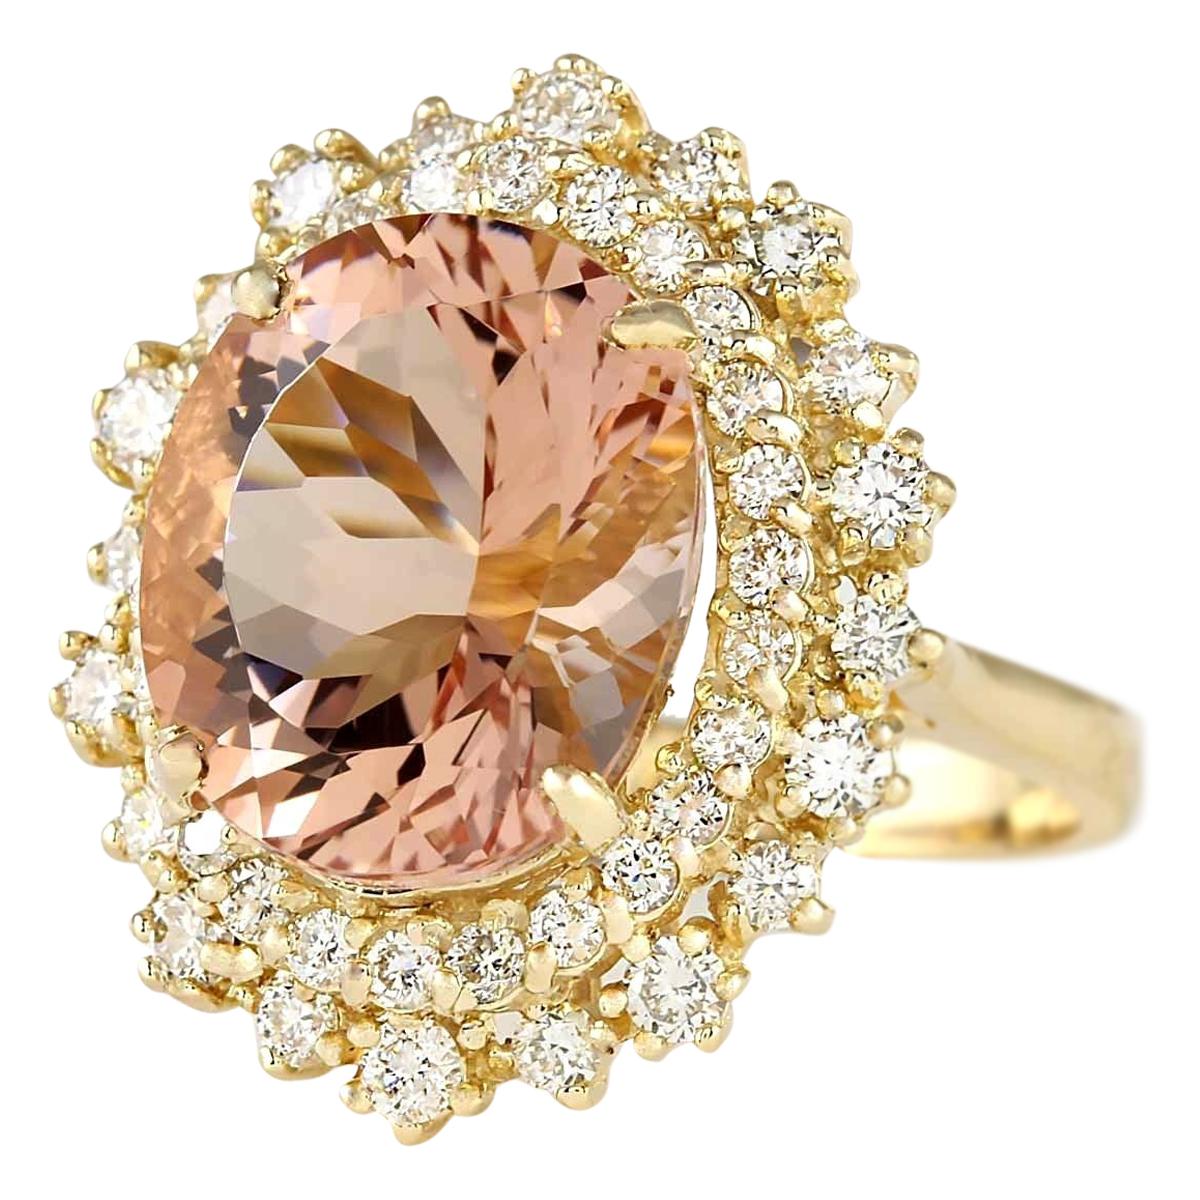 Stamped: 14K Yellow Gold
Total Ring Weight: 8.3 Grams
Total Natural Morganite Weight is 7.50 Carat (Measures: 14.00x10.00 mm)
Color: Peach
Total Natural Diamond Weight is 1.20 Carat
Color: F-G, Clarity: VS2-SI1
Face Measures: 23.25x19.25 mm
Sku: